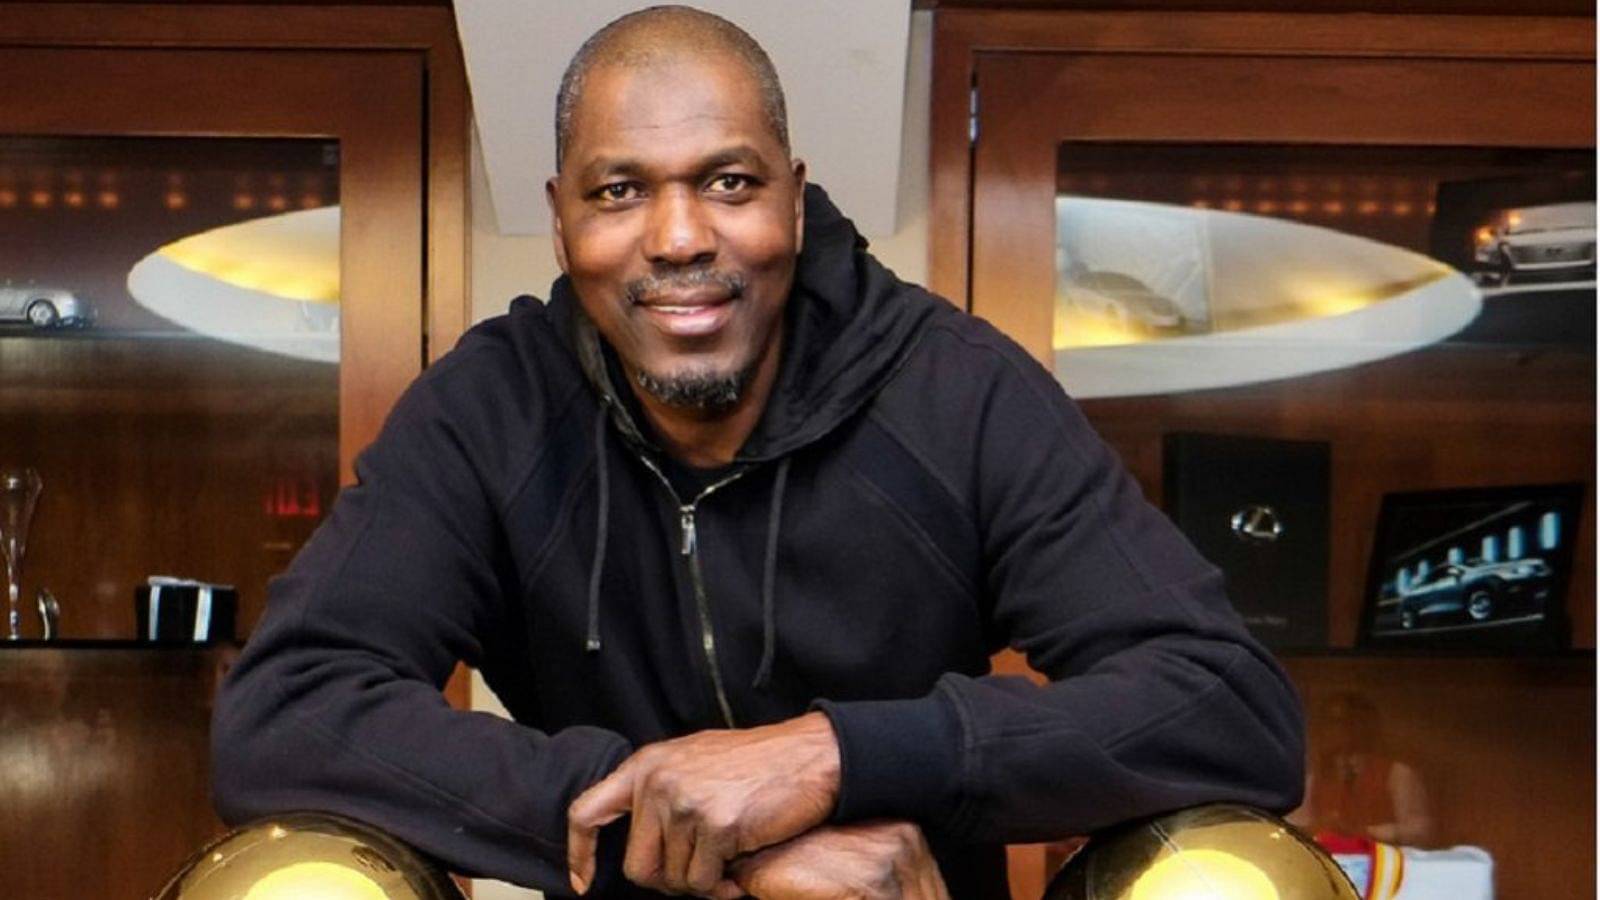 A Hakeem Olajuwon Mosque Once Donated $80,000 to Fronts Supporting Terror Groups al-Qaida and Hamas